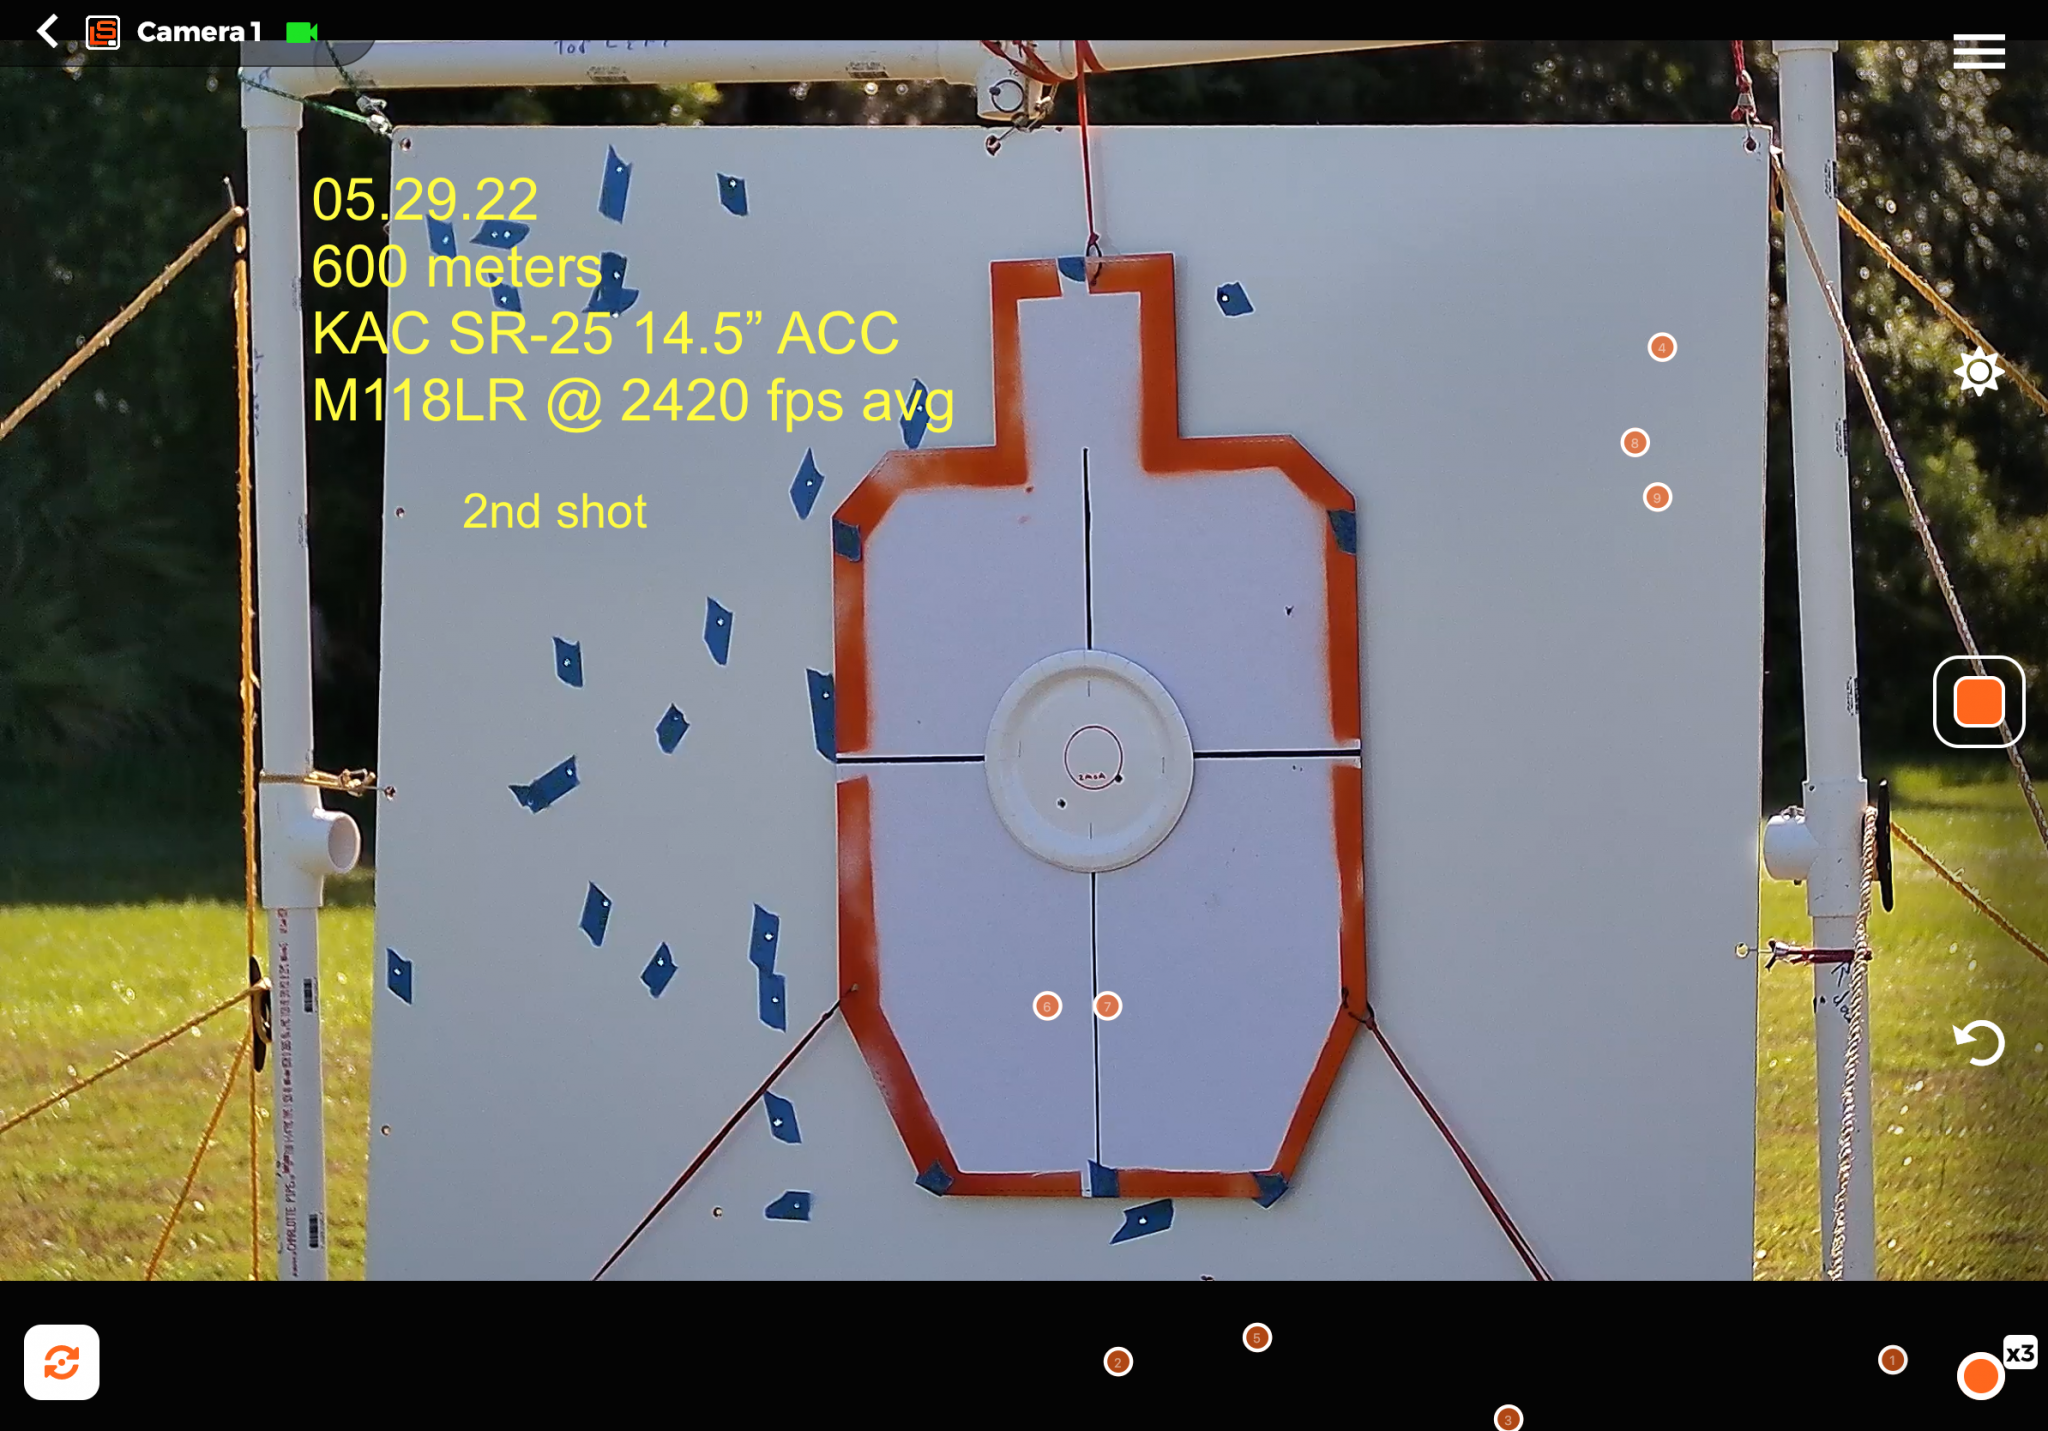 IMG_3225CRACKER SWAMP KAC SR-25 7TH Session 600 Meters First Two Shots 05.29.22 copy 2.png